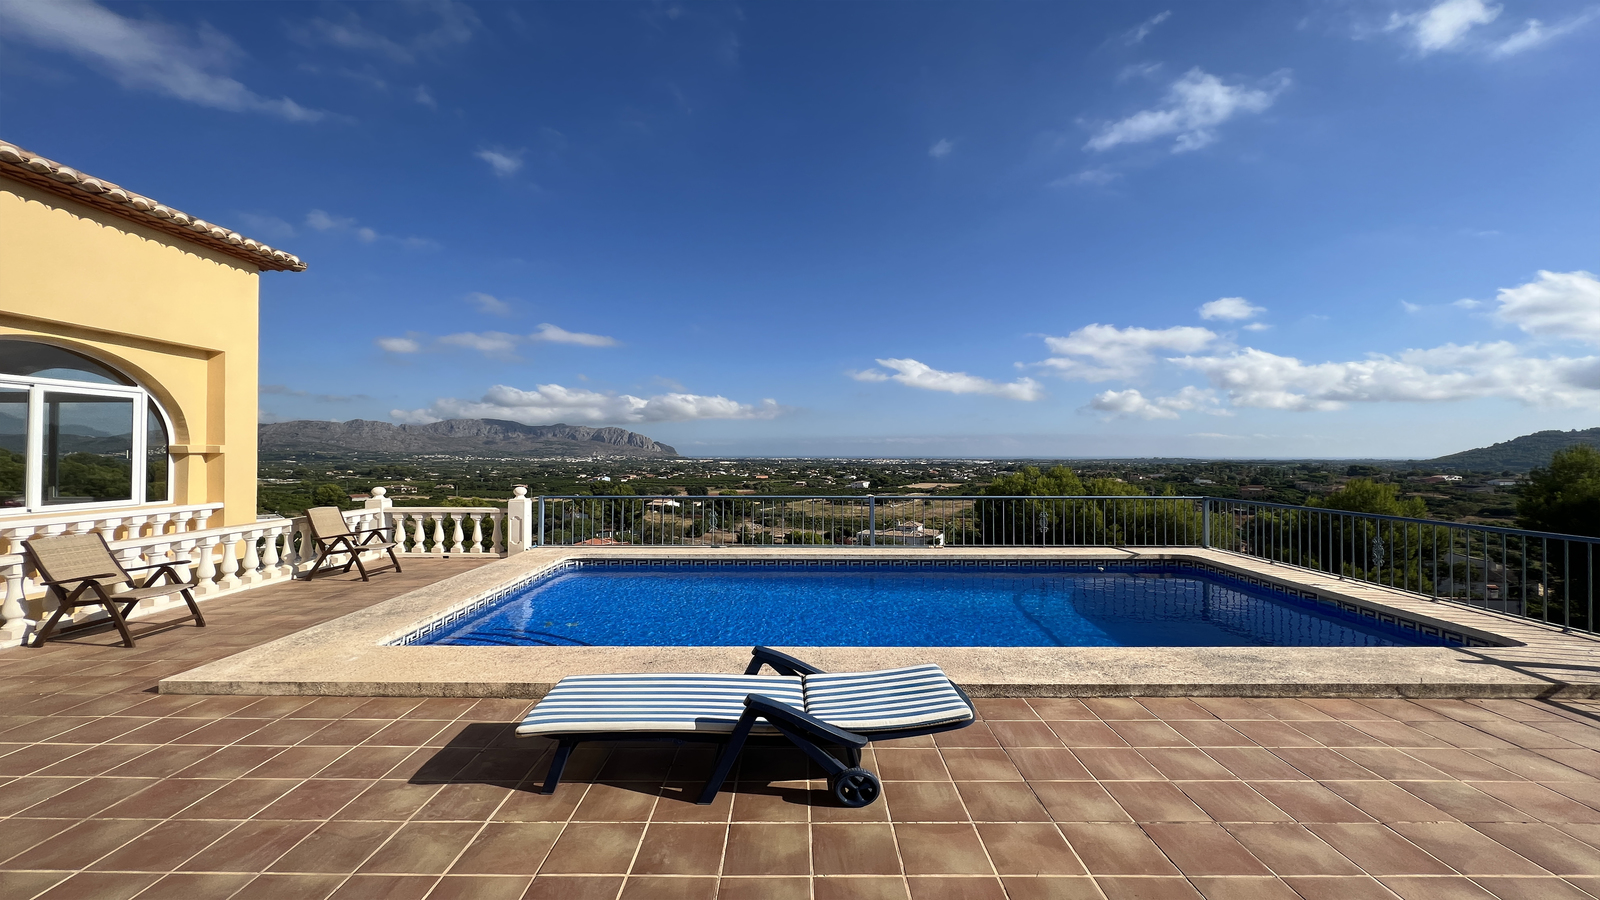 Beautiful 3 bedroom villa with pool with panoramic views, BBQ area, parking space.